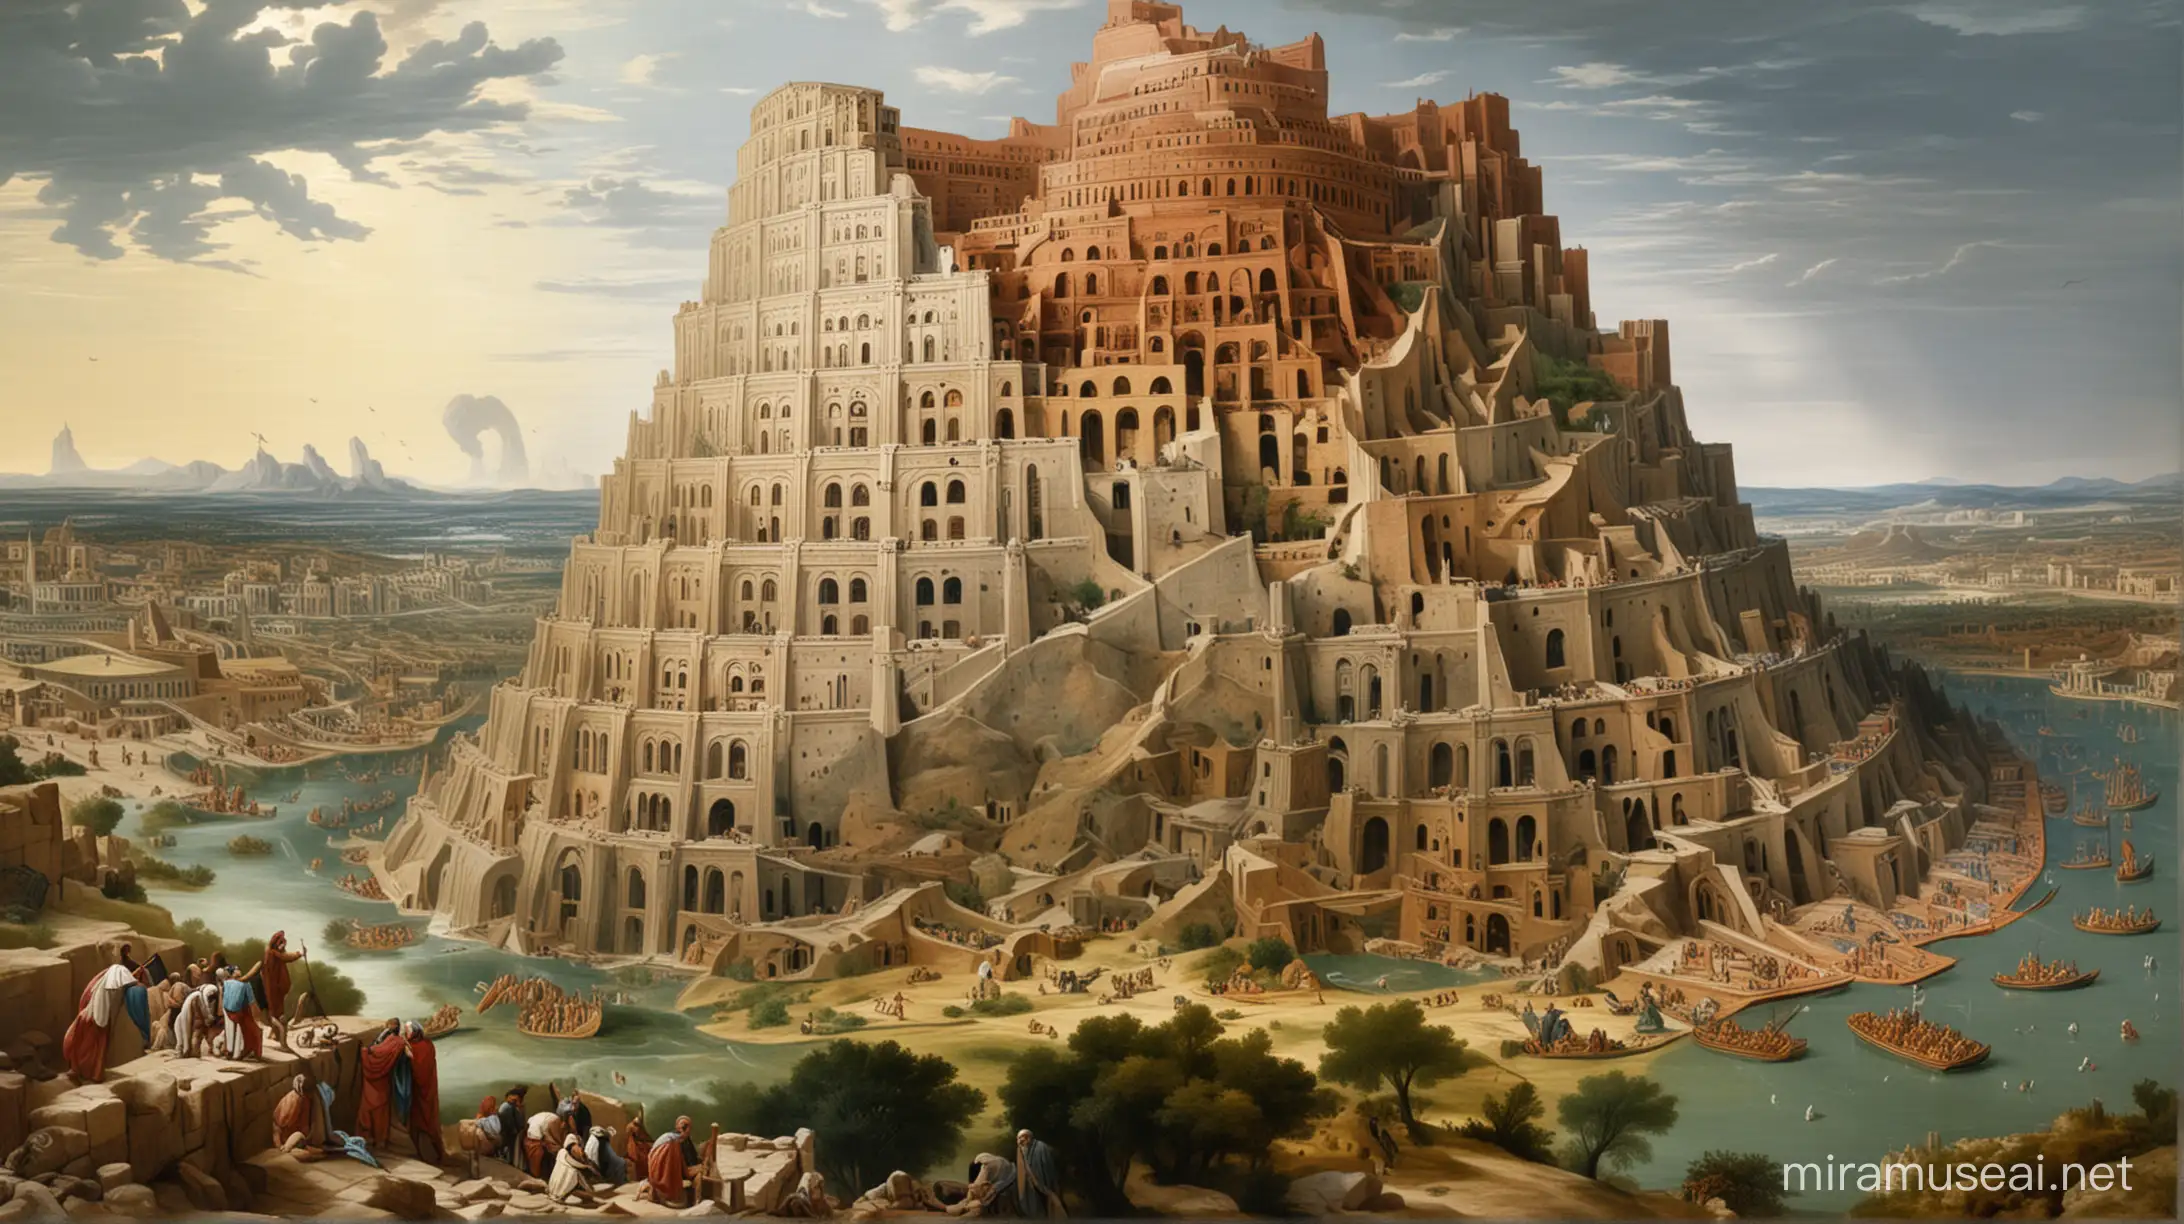 Tower of Babel Construction in Ancient Biblical Times